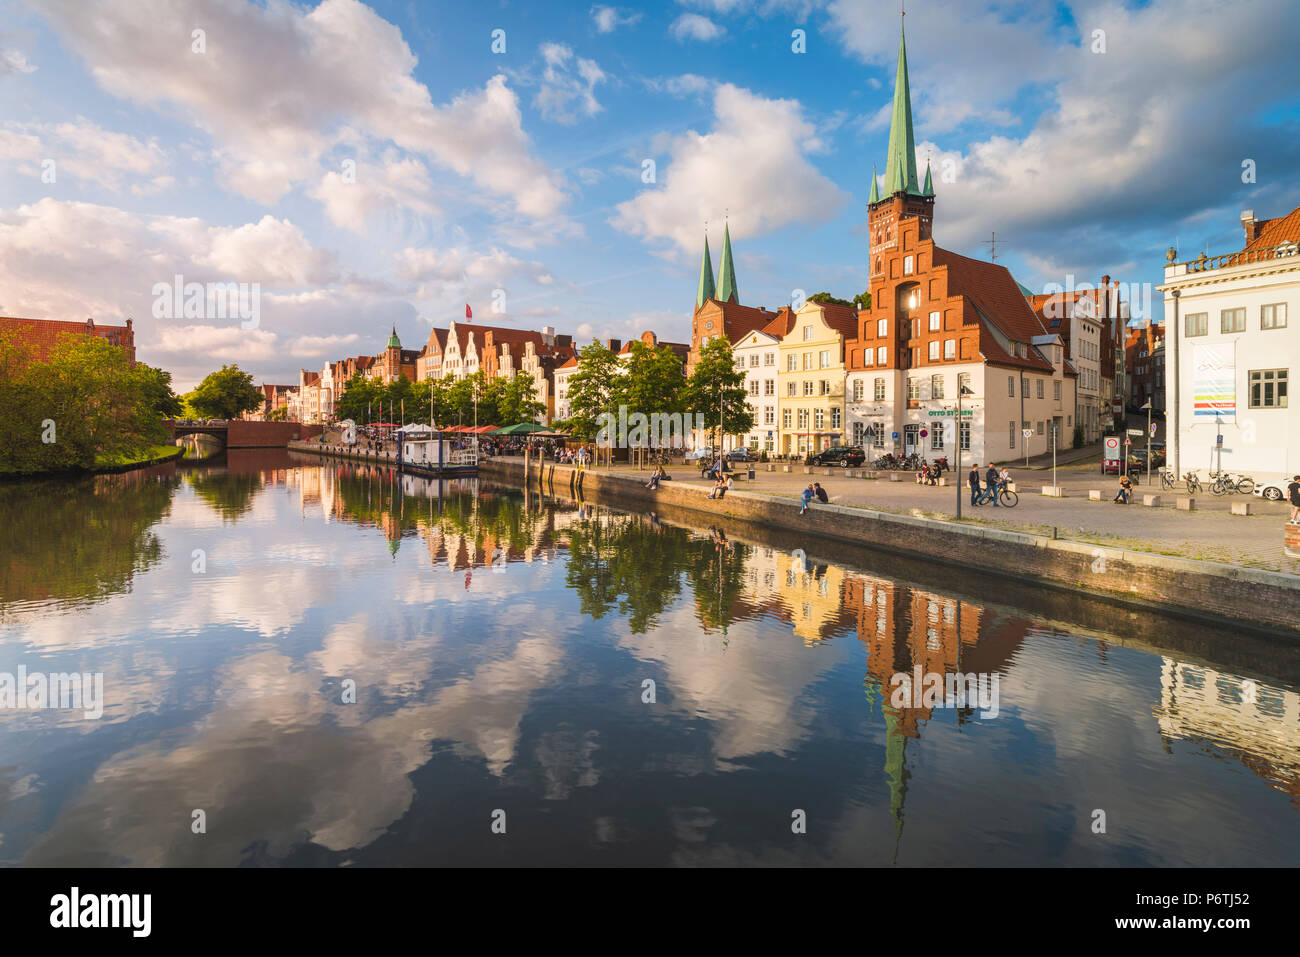 LÃ¼beck, Baltic coast, Schleswig-Holstein, Germany. Old town's houses along the Trave river's waterfront. Stock Photo